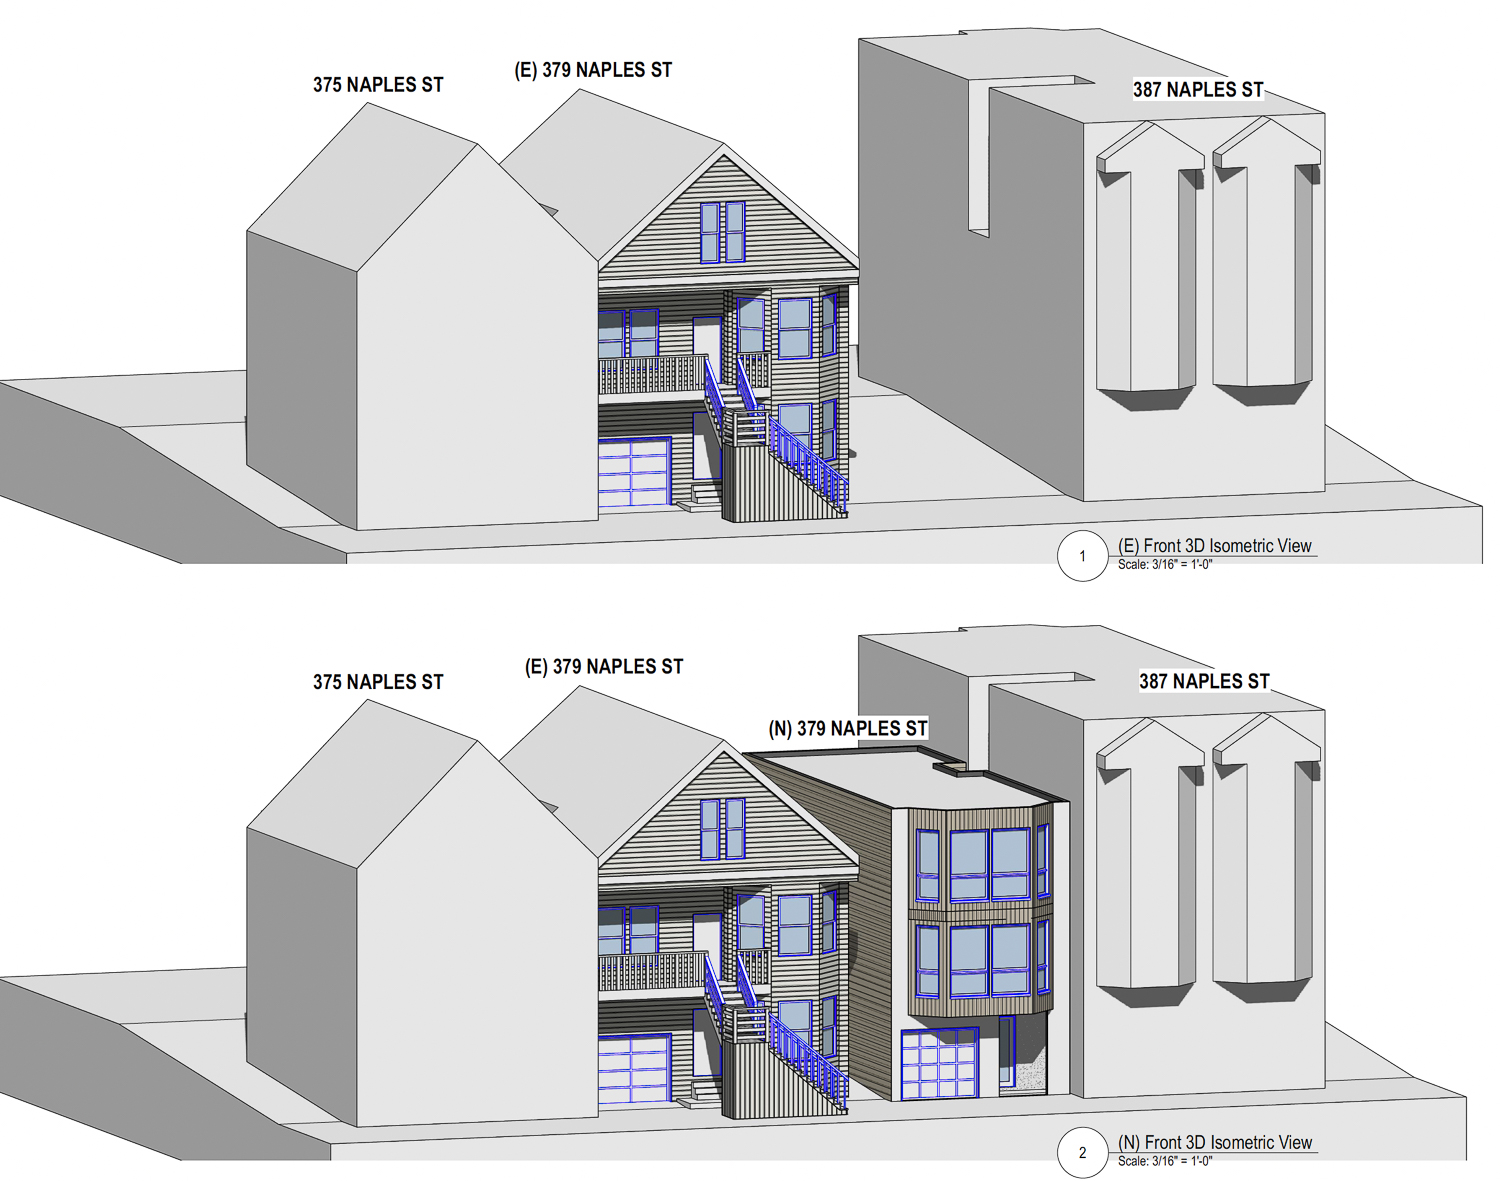 379 Naples Street existing condition (above) and proposed construction (below), illustration by SIA Consulting